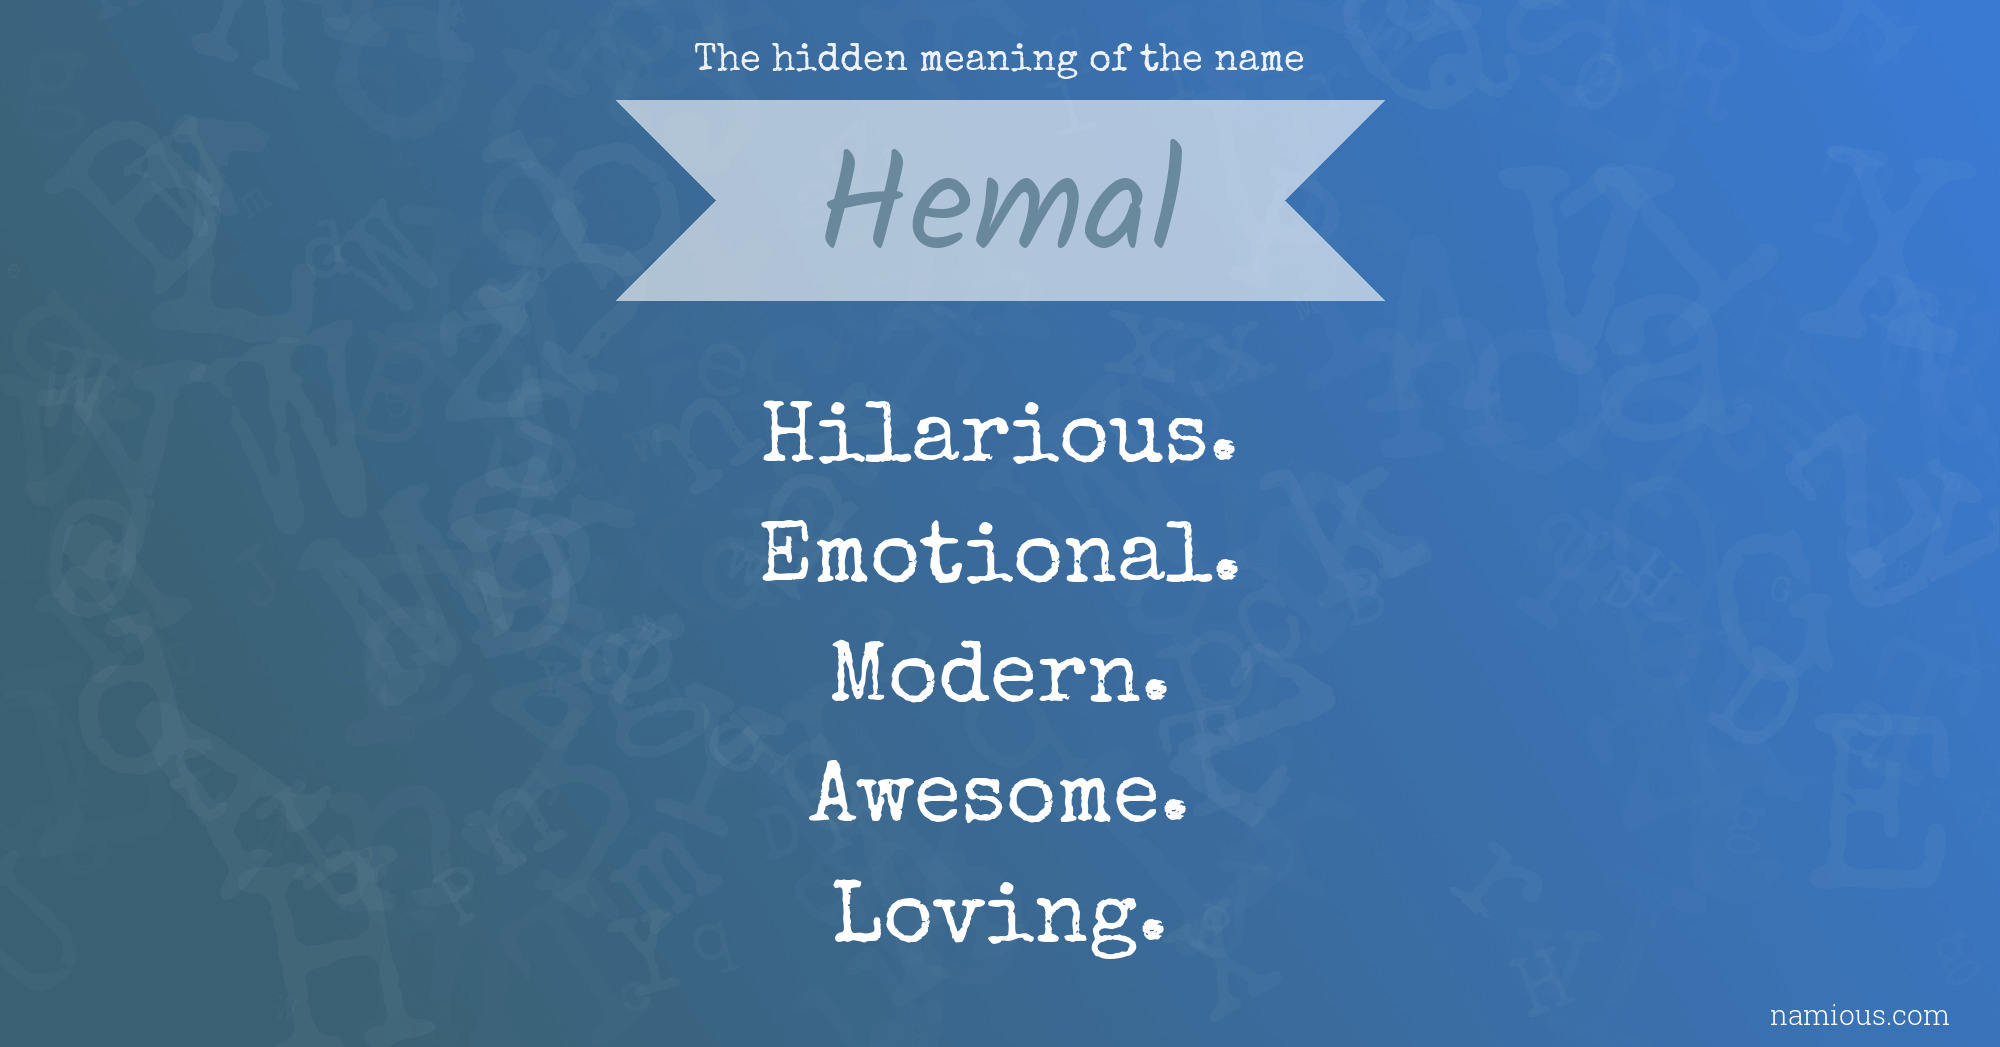 The hidden meaning of the name Hemal